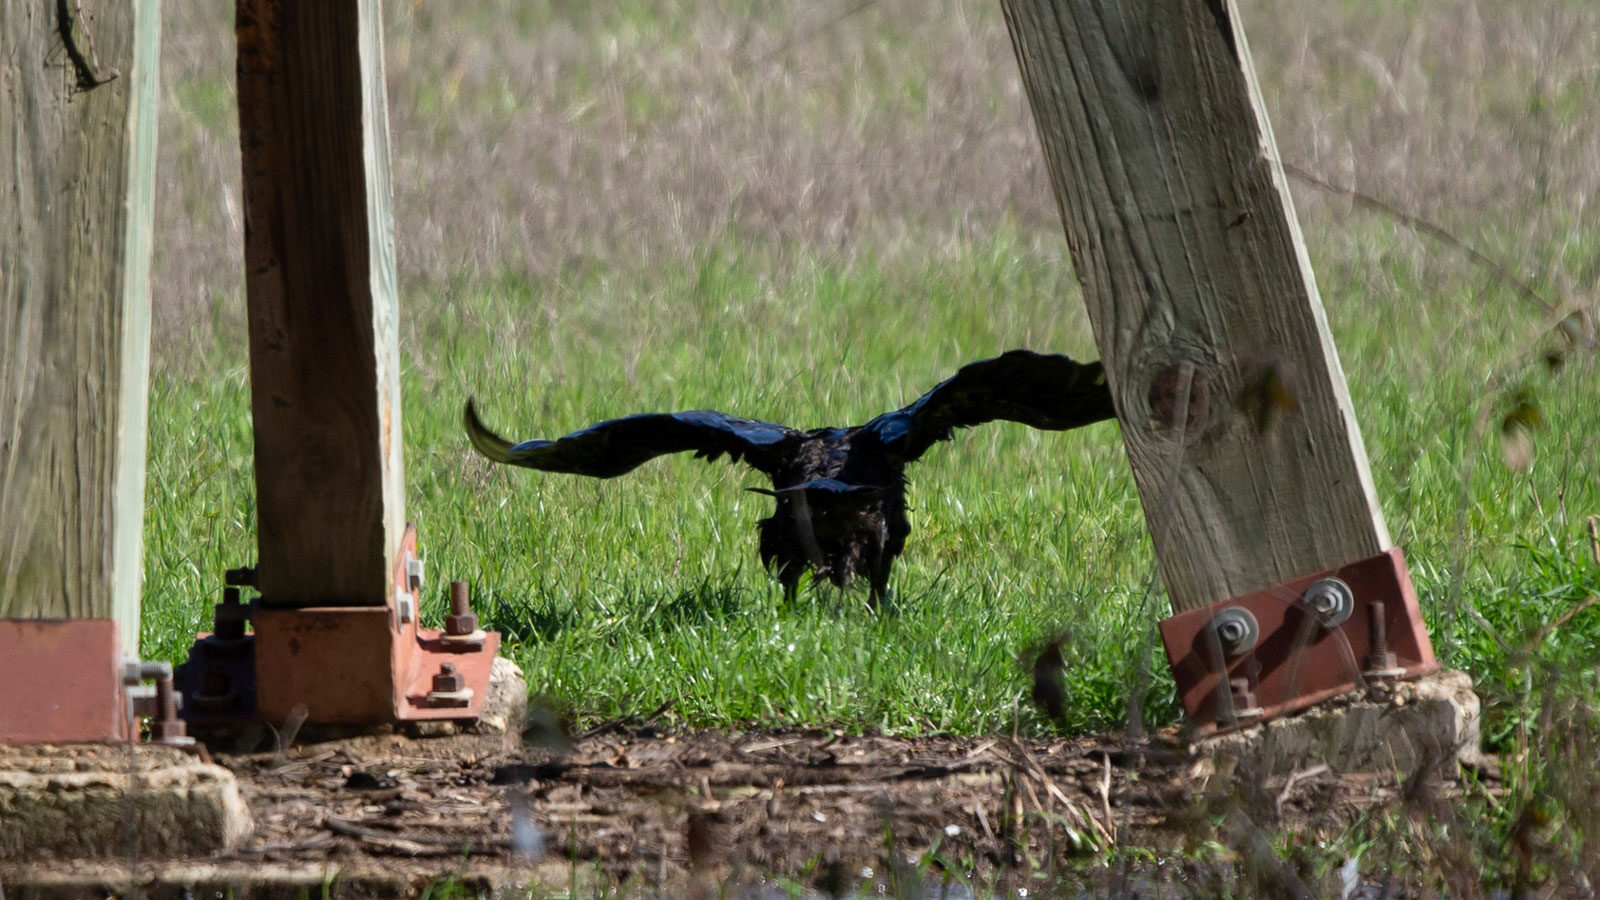 Black vulture landing on the ground in green grass